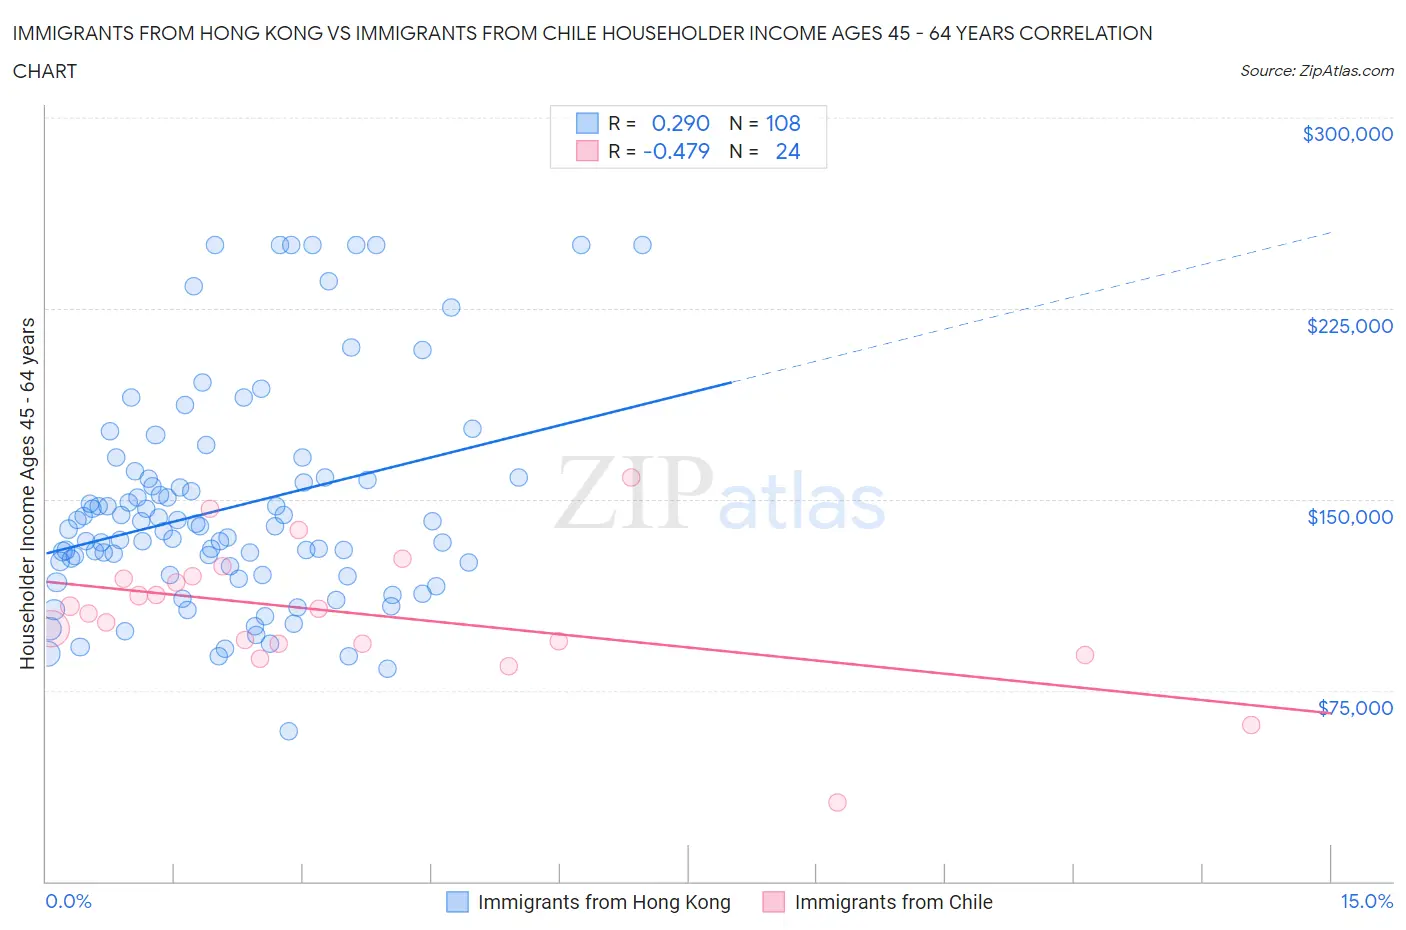 Immigrants from Hong Kong vs Immigrants from Chile Householder Income Ages 45 - 64 years